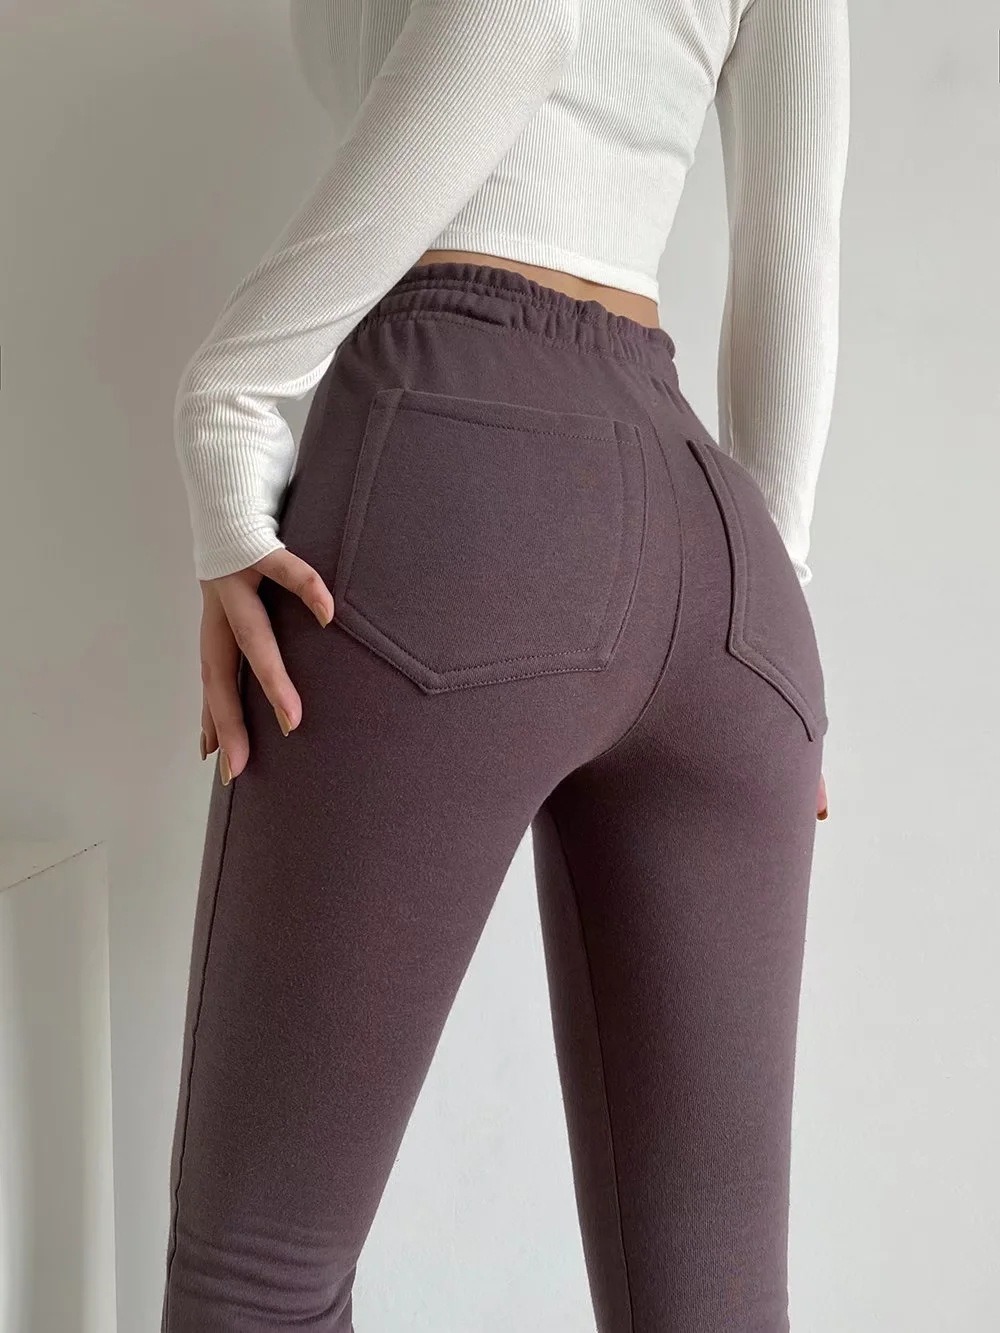 Spring High-Waisted Retro Lazy Stretch Micro-Cropped Pants for Women Slim Casual Pants